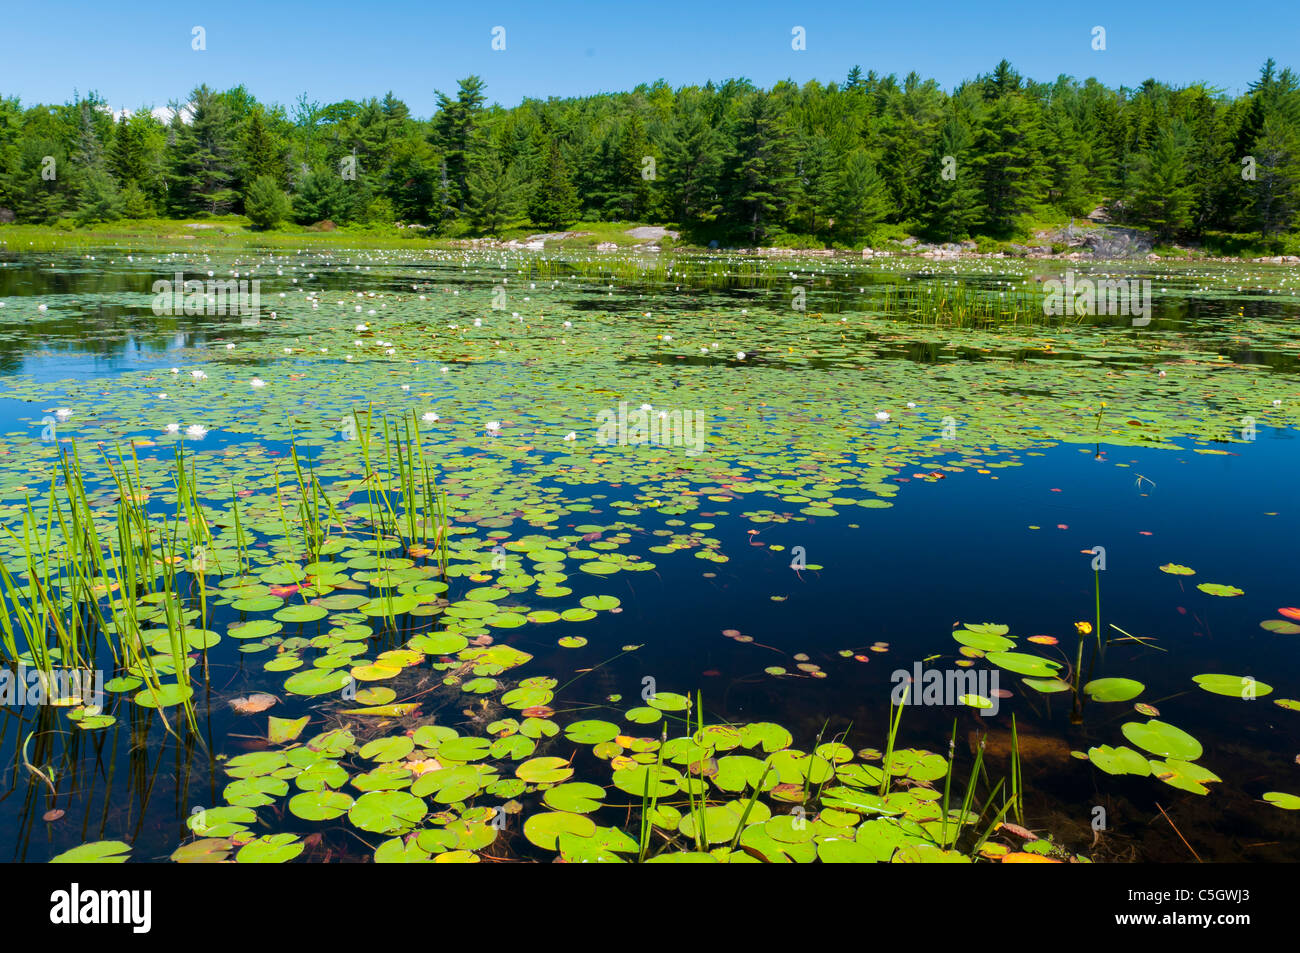 White Water Lilly Étang Acadia National Park Maine United States Banque D'Images